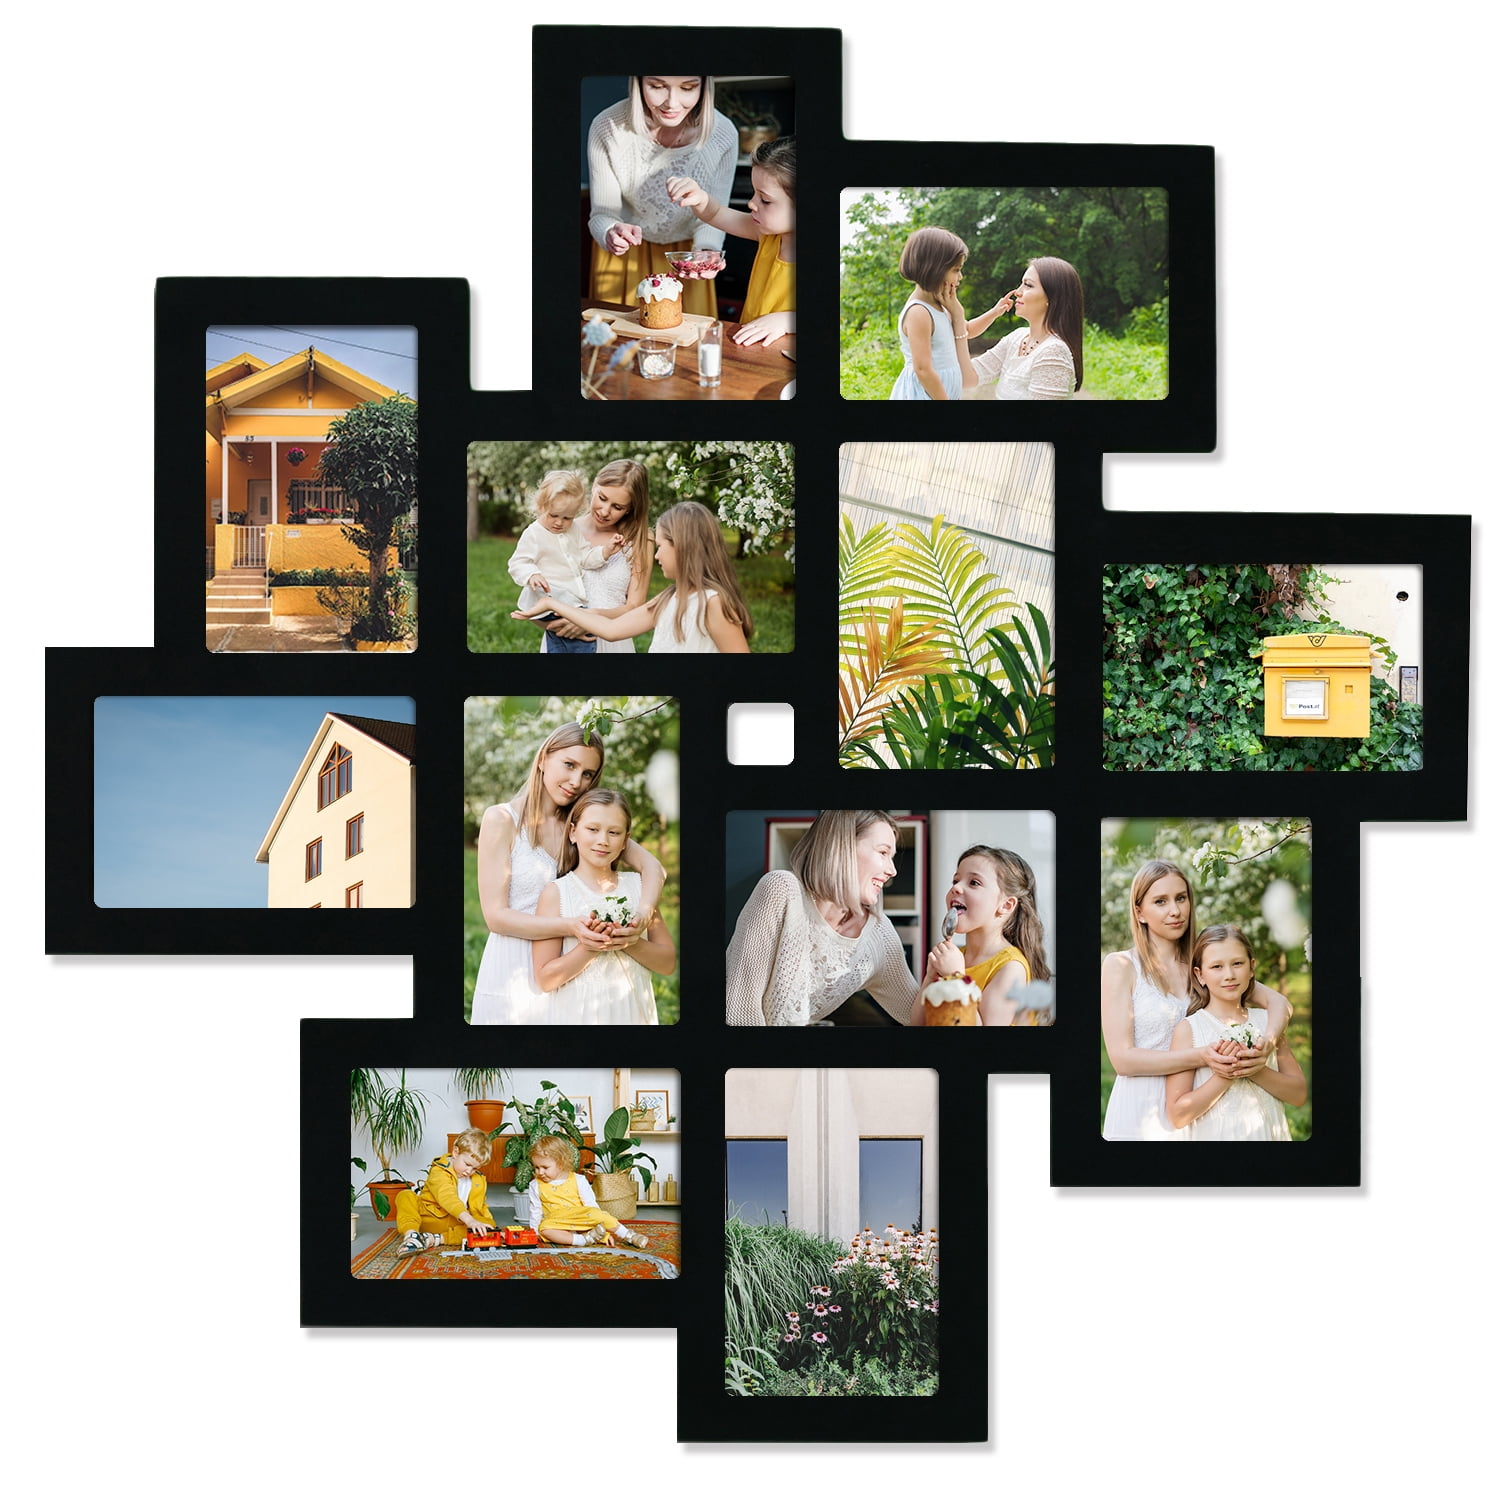 SONGMICS Collage Picture Frames, 4x6 Picture Frames Collage for Wall Decor  Set of 12, Family Muti Photo Frame for Gallery Decor, Hanging Display,  Assembly Required